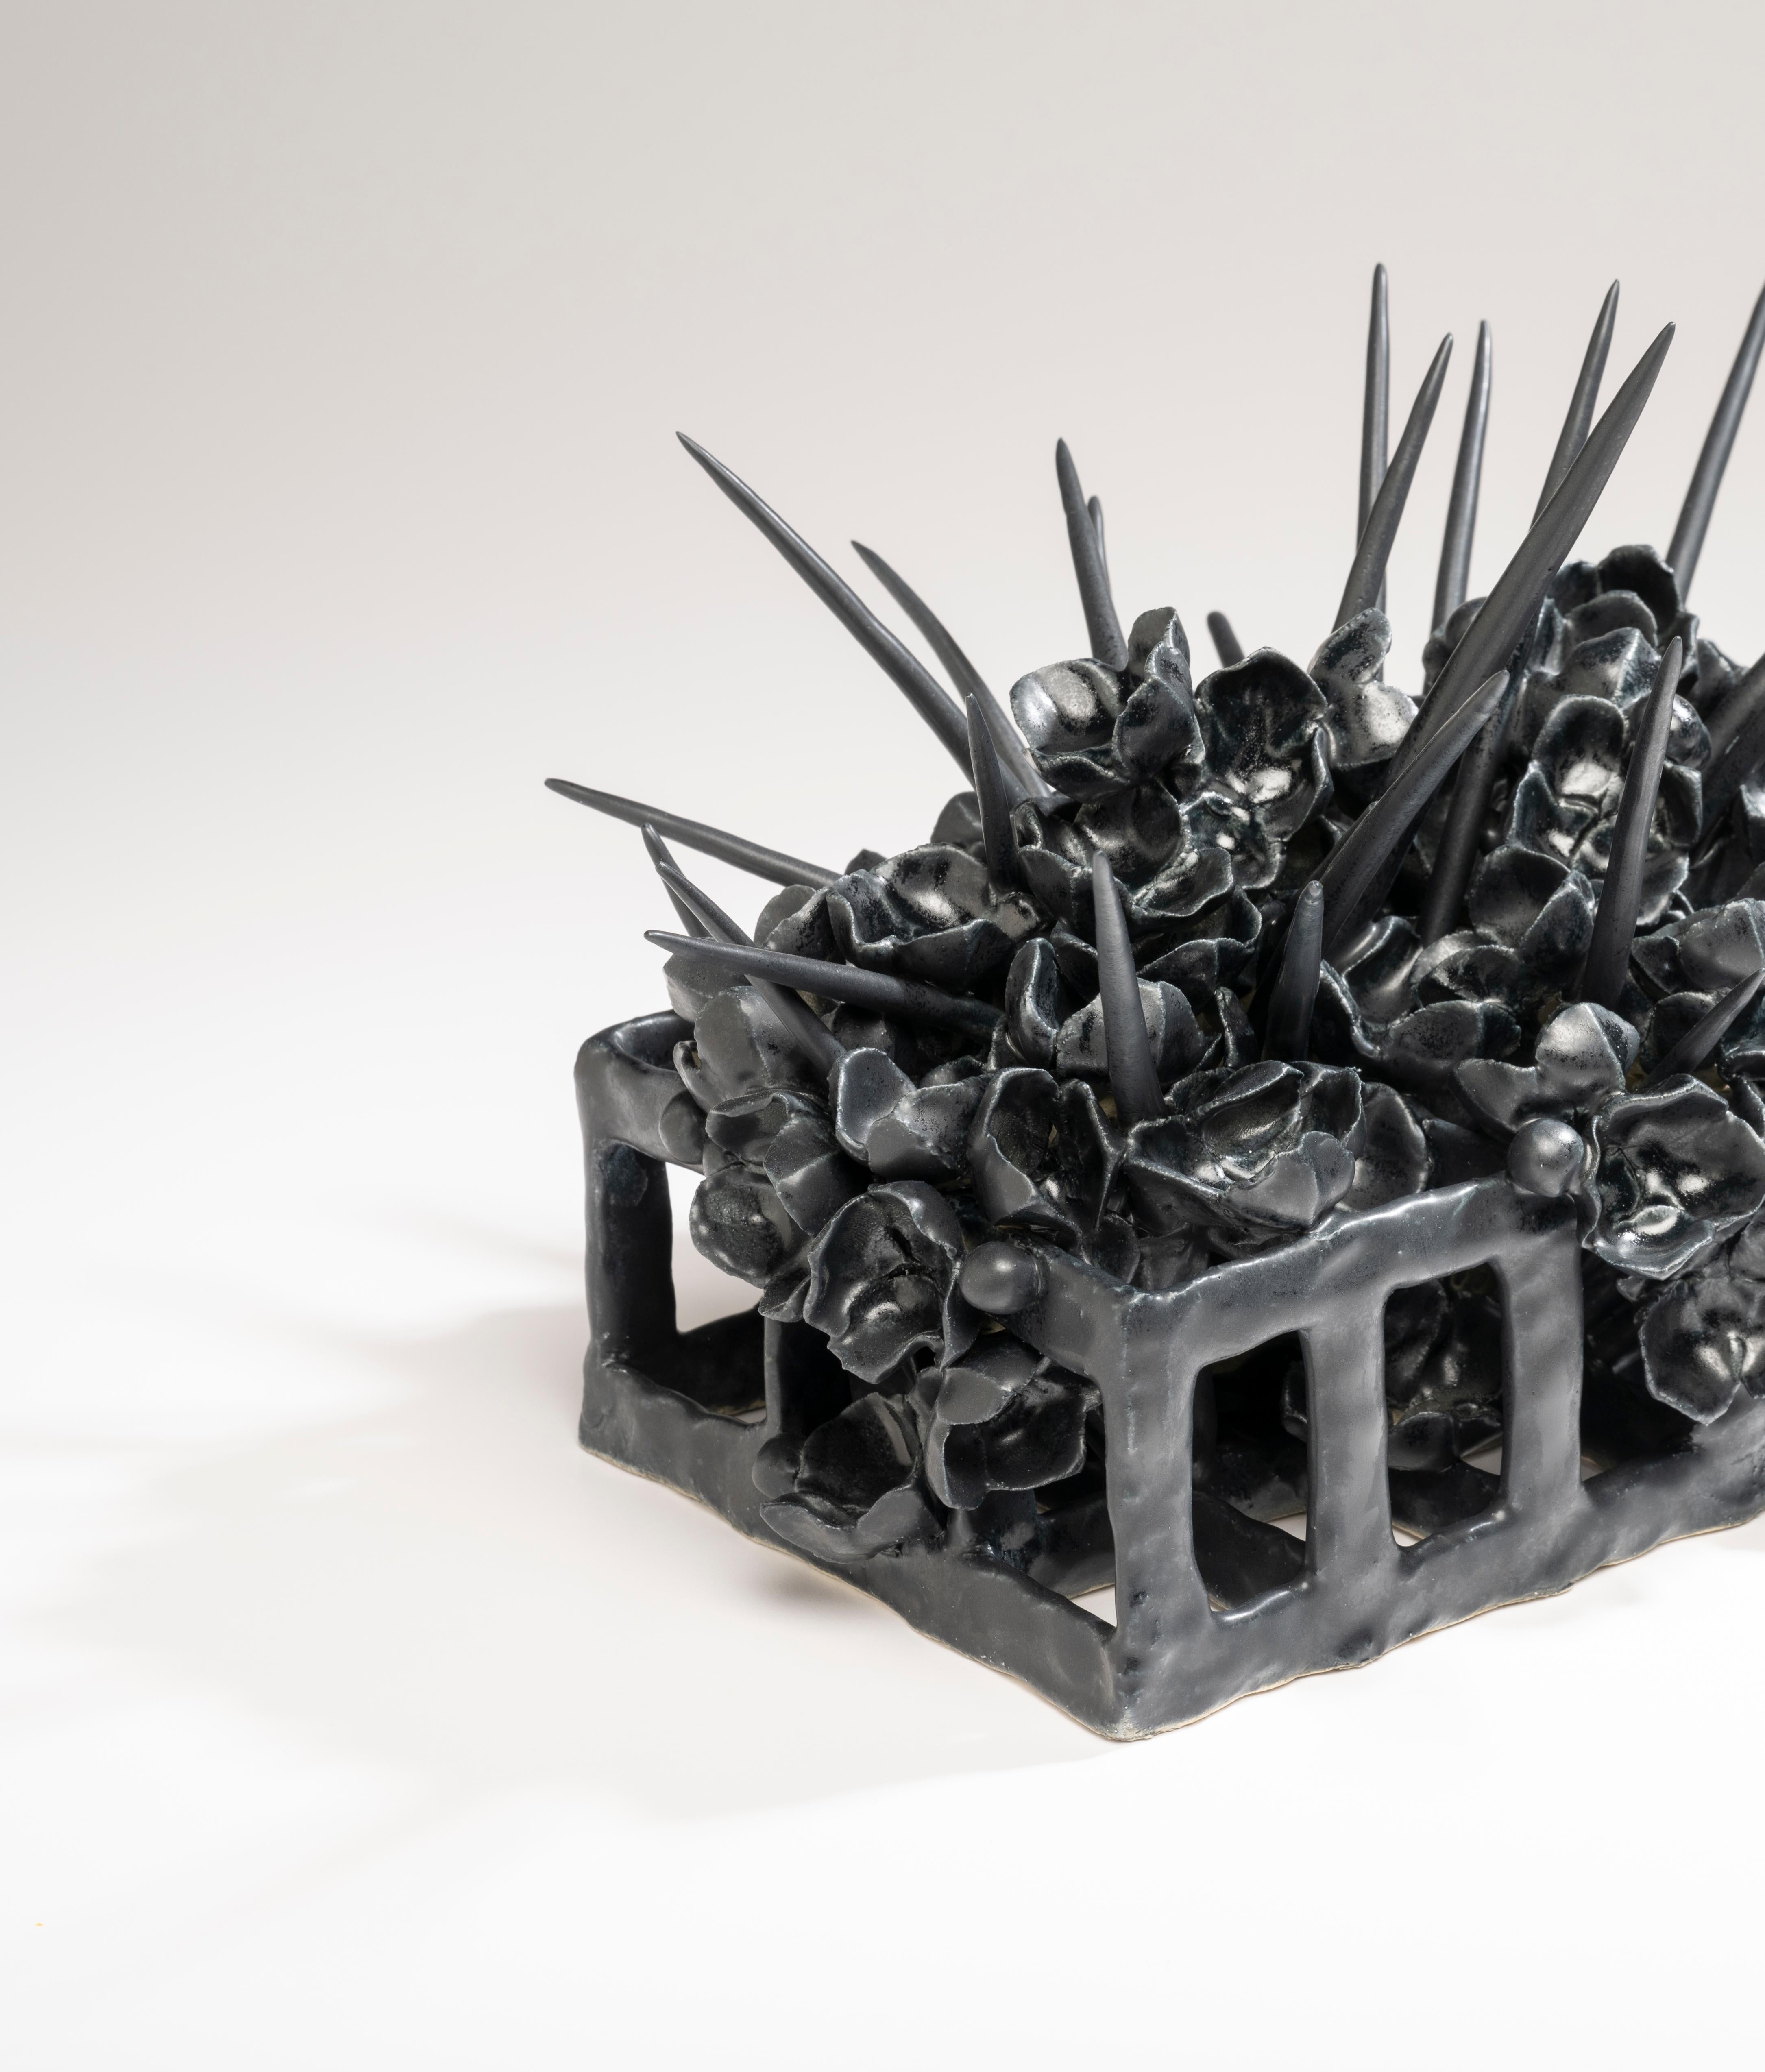 American Joanna Poag Binding Time (Black Grid with Quills) Ceramic Sculpture, 2021 For Sale